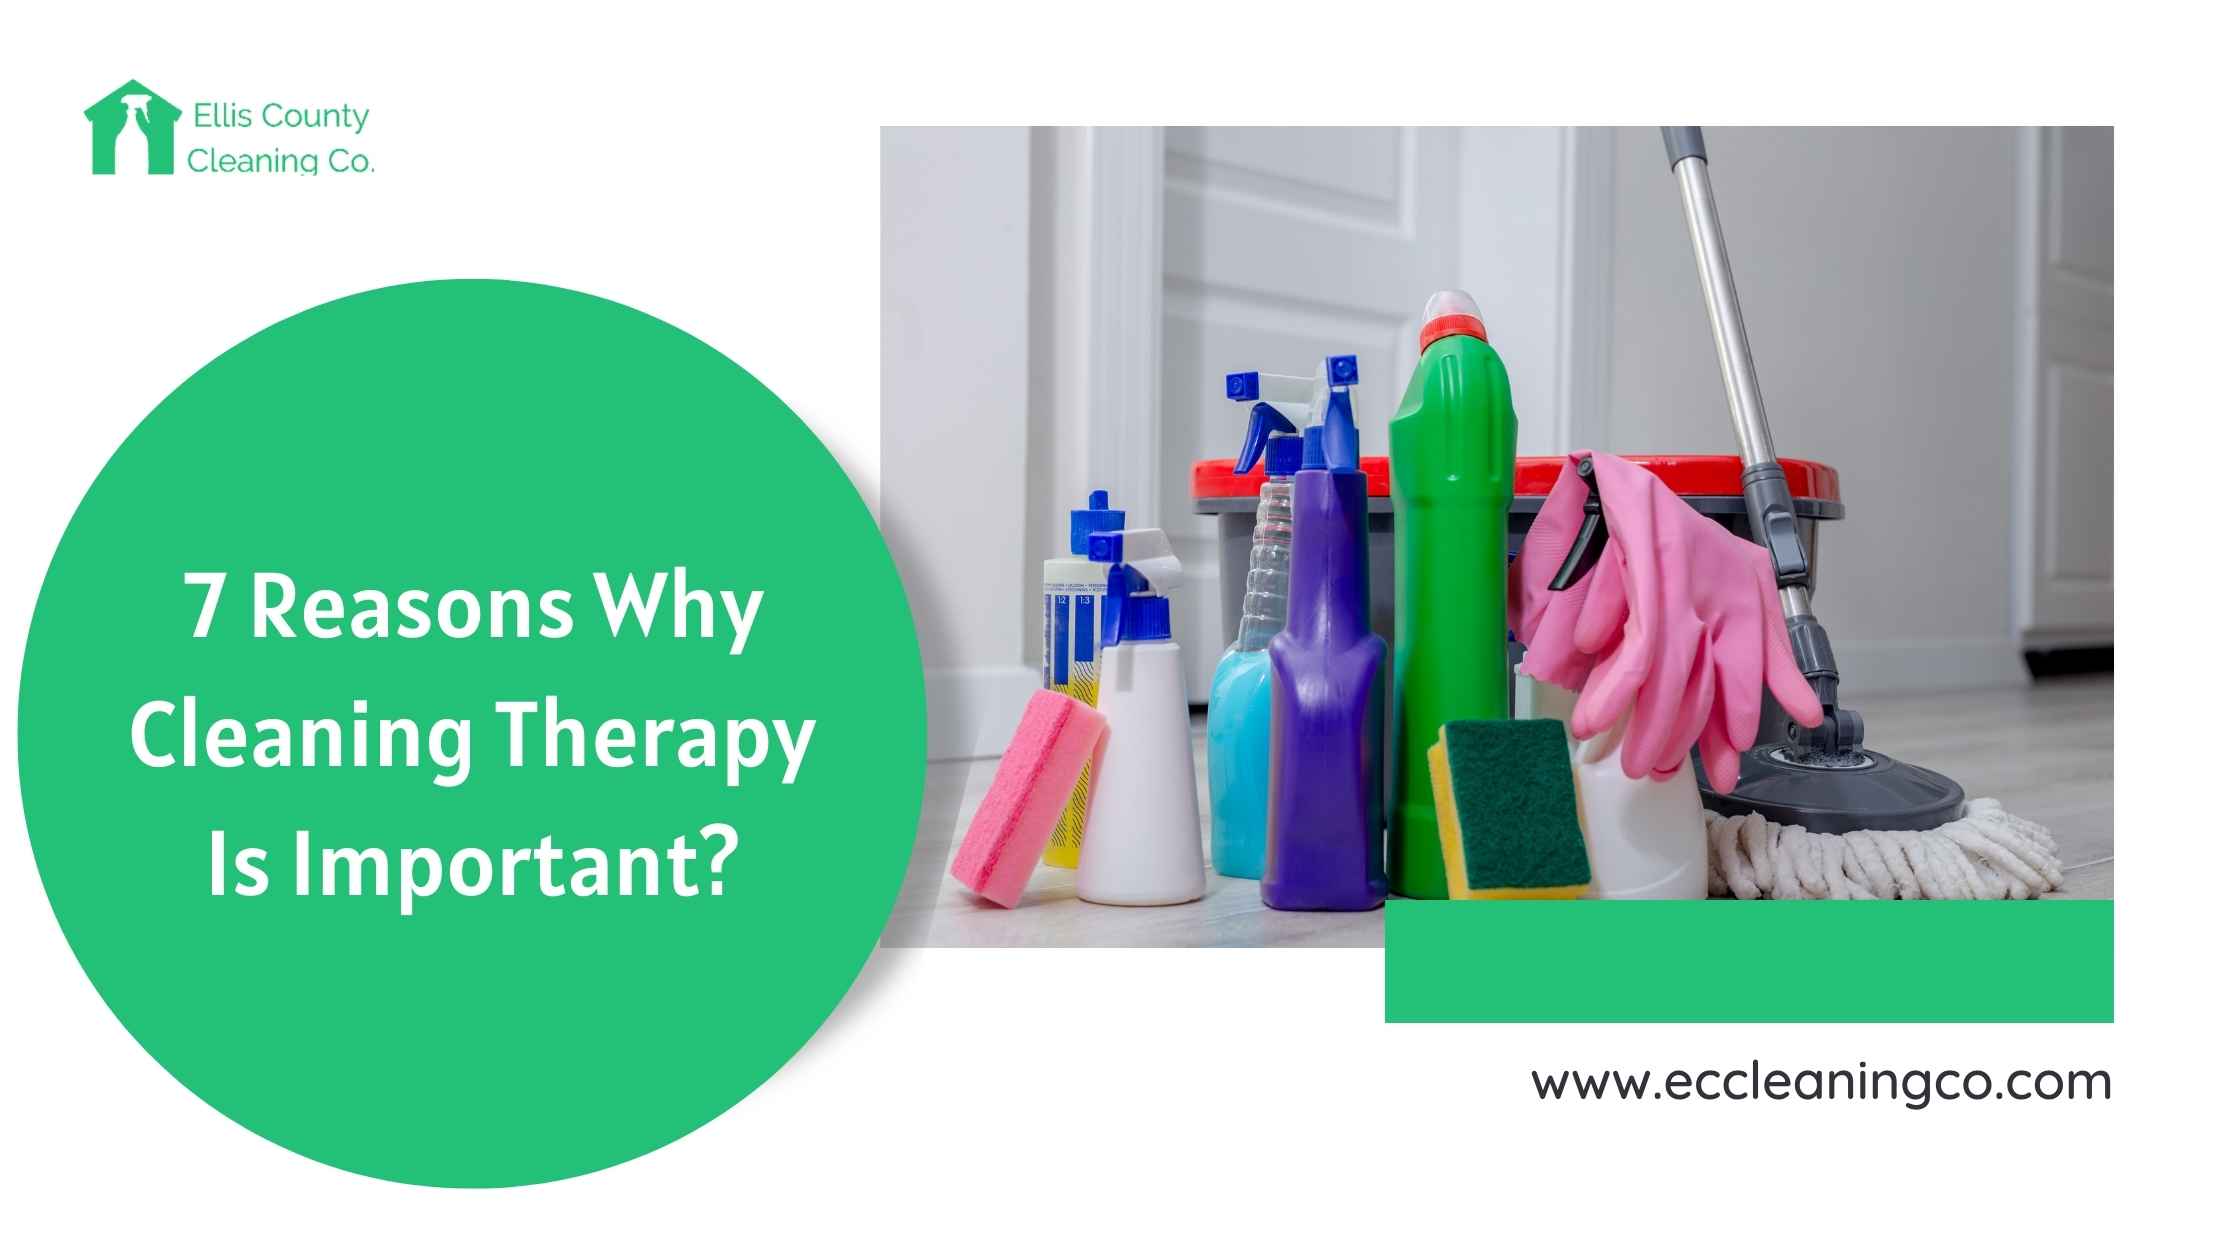 7 Reasons Why Cleaning Therapy Is Important